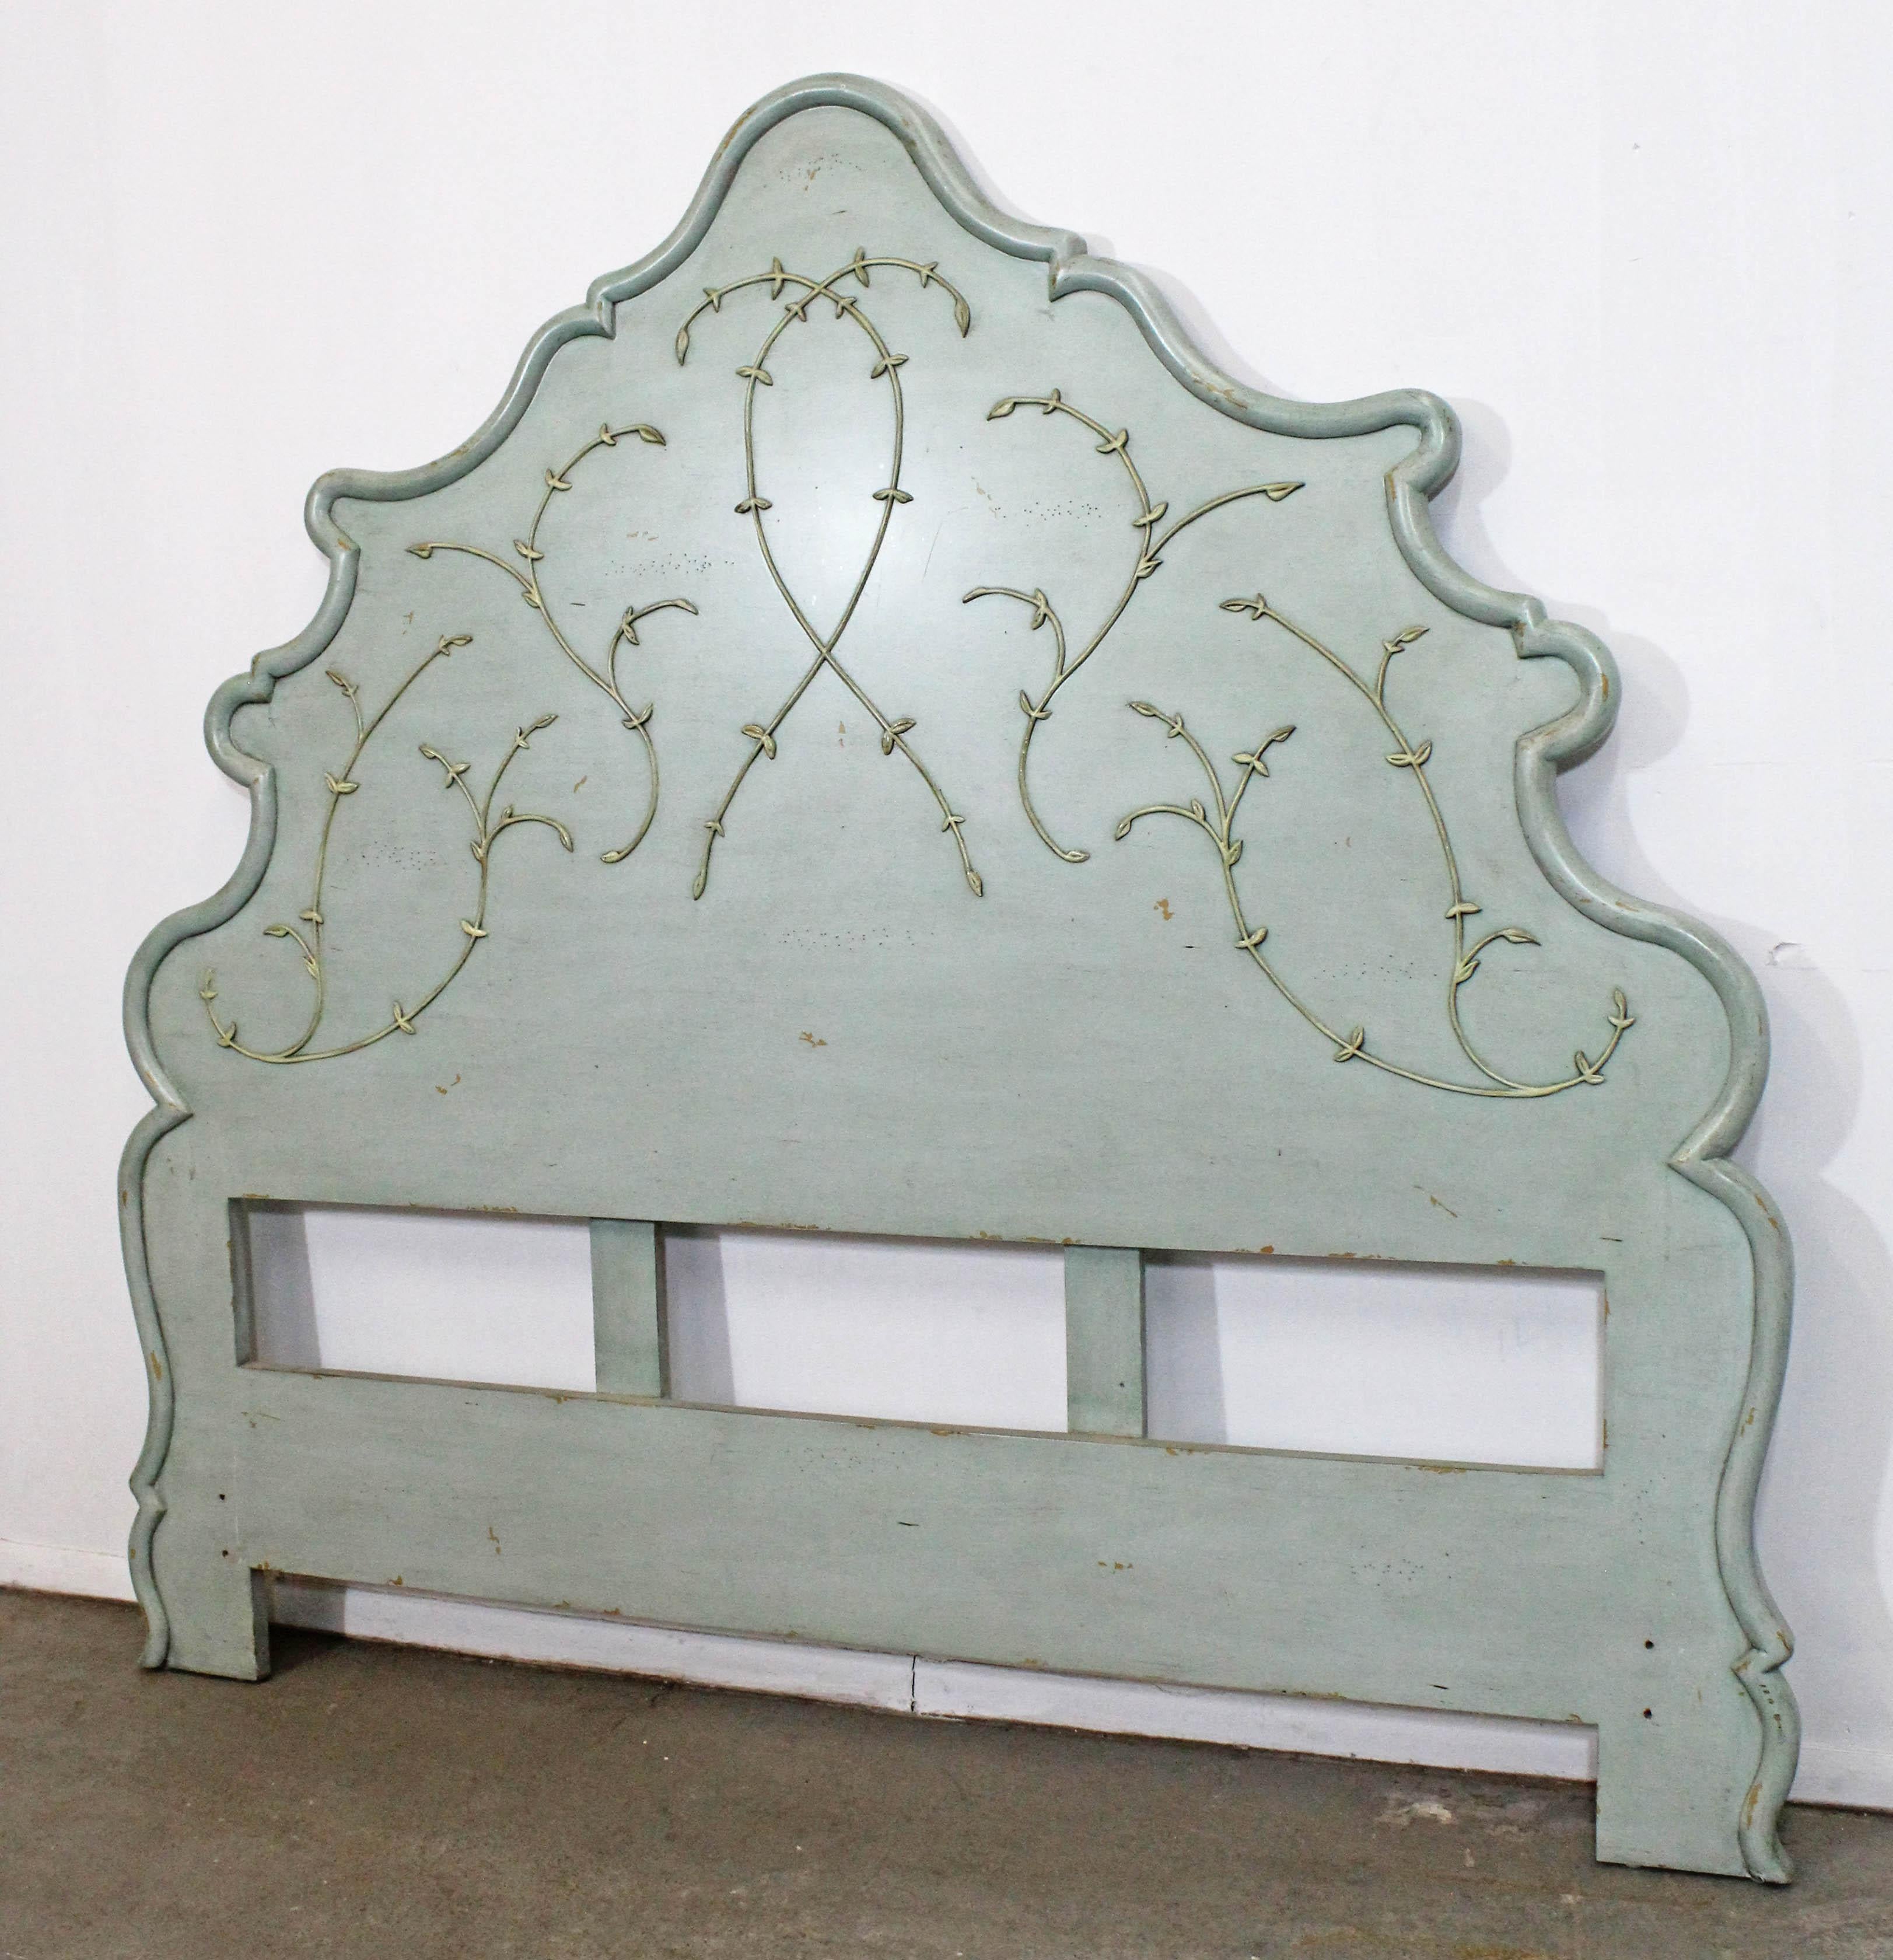 Offered is a beautiful, rustic French Country headboard for a queen size mattress. This headboard is painted in a light teal and features an ornately carved design with a slightly distressed look. The piece is in great condition with little wear.